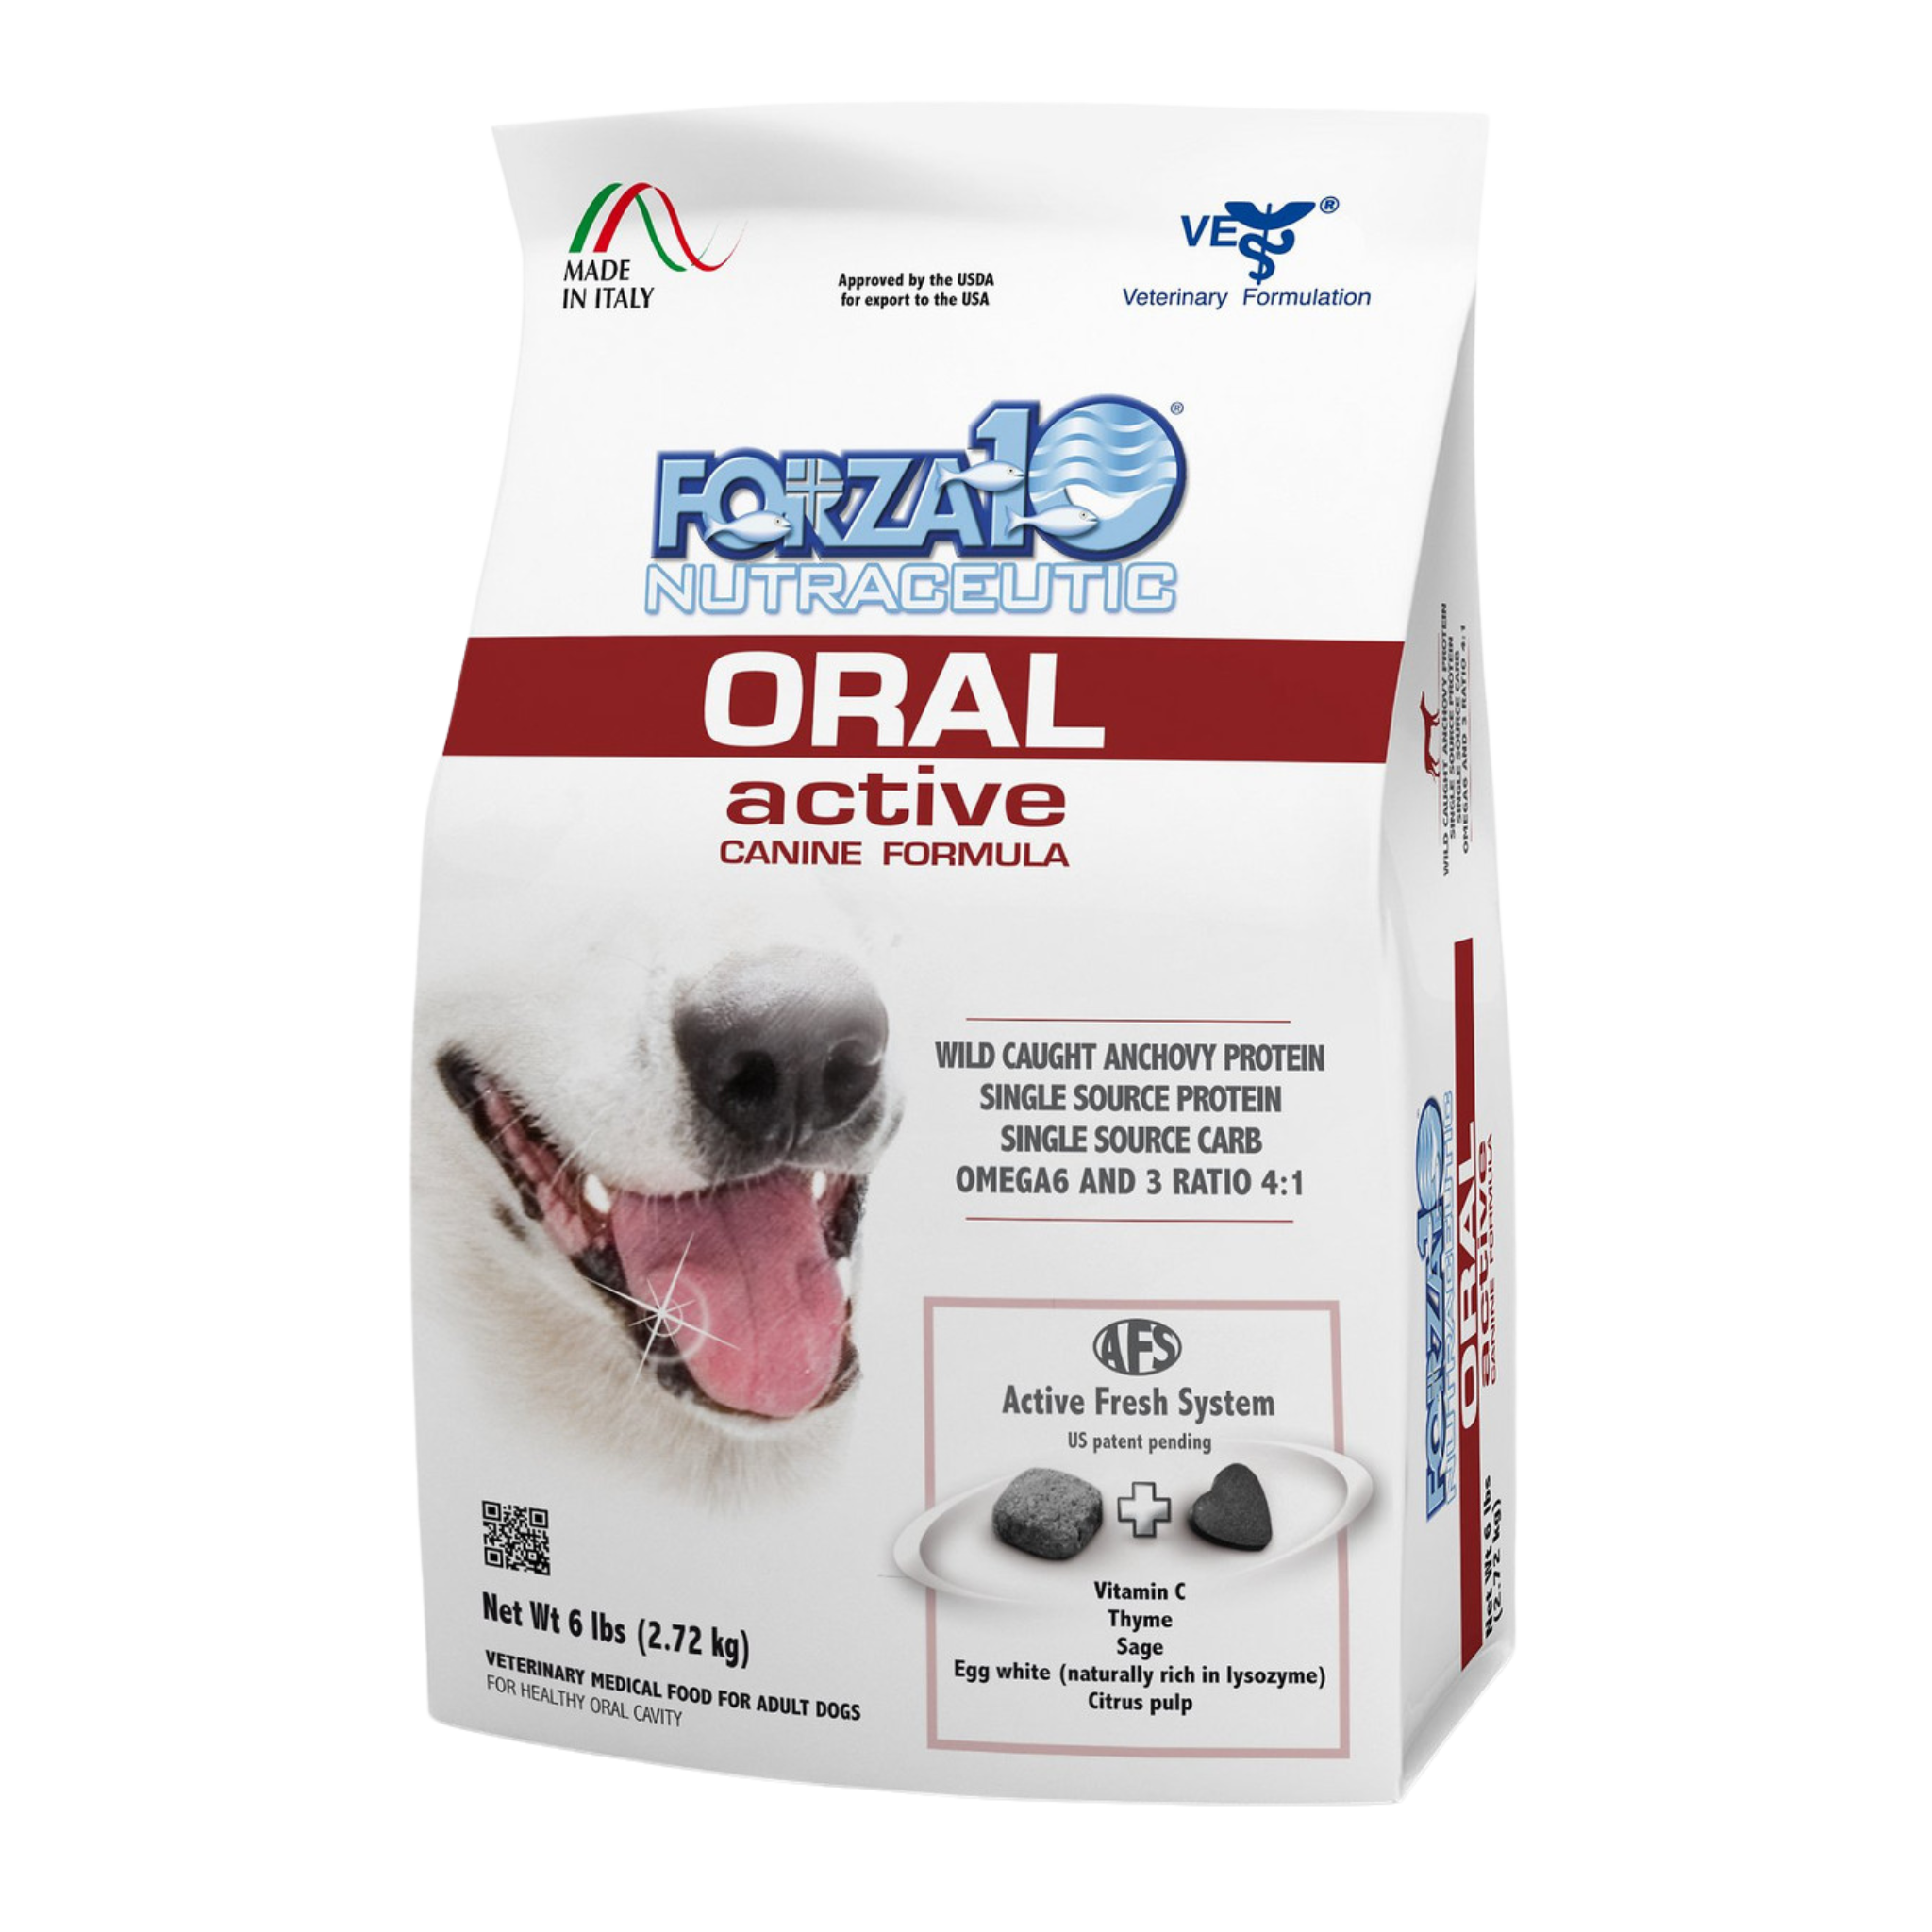 Forza10 Nutraceutic Active Line Oral Support Diet Dry Dog Food - Mutts & Co.